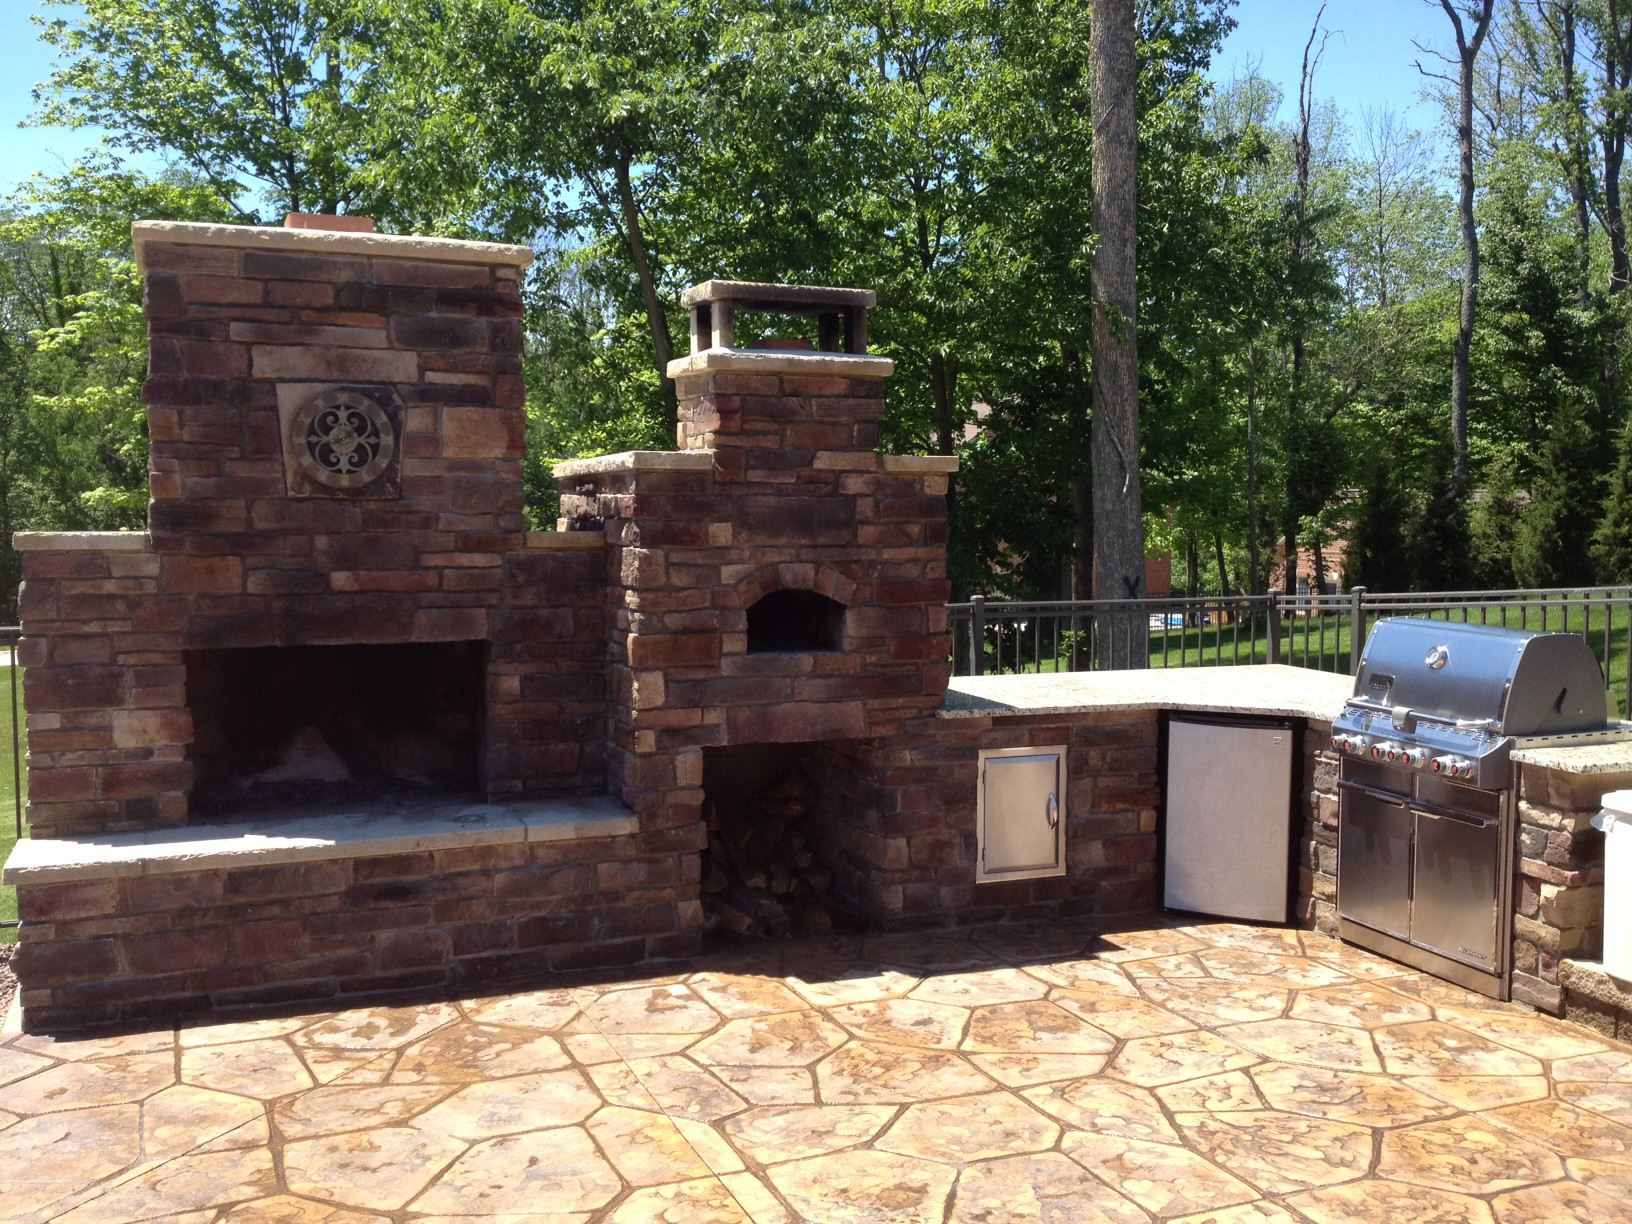 DIY Outdoor Pizza Oven
 DIY Outdoor Fireplace and Pizza Oven bos